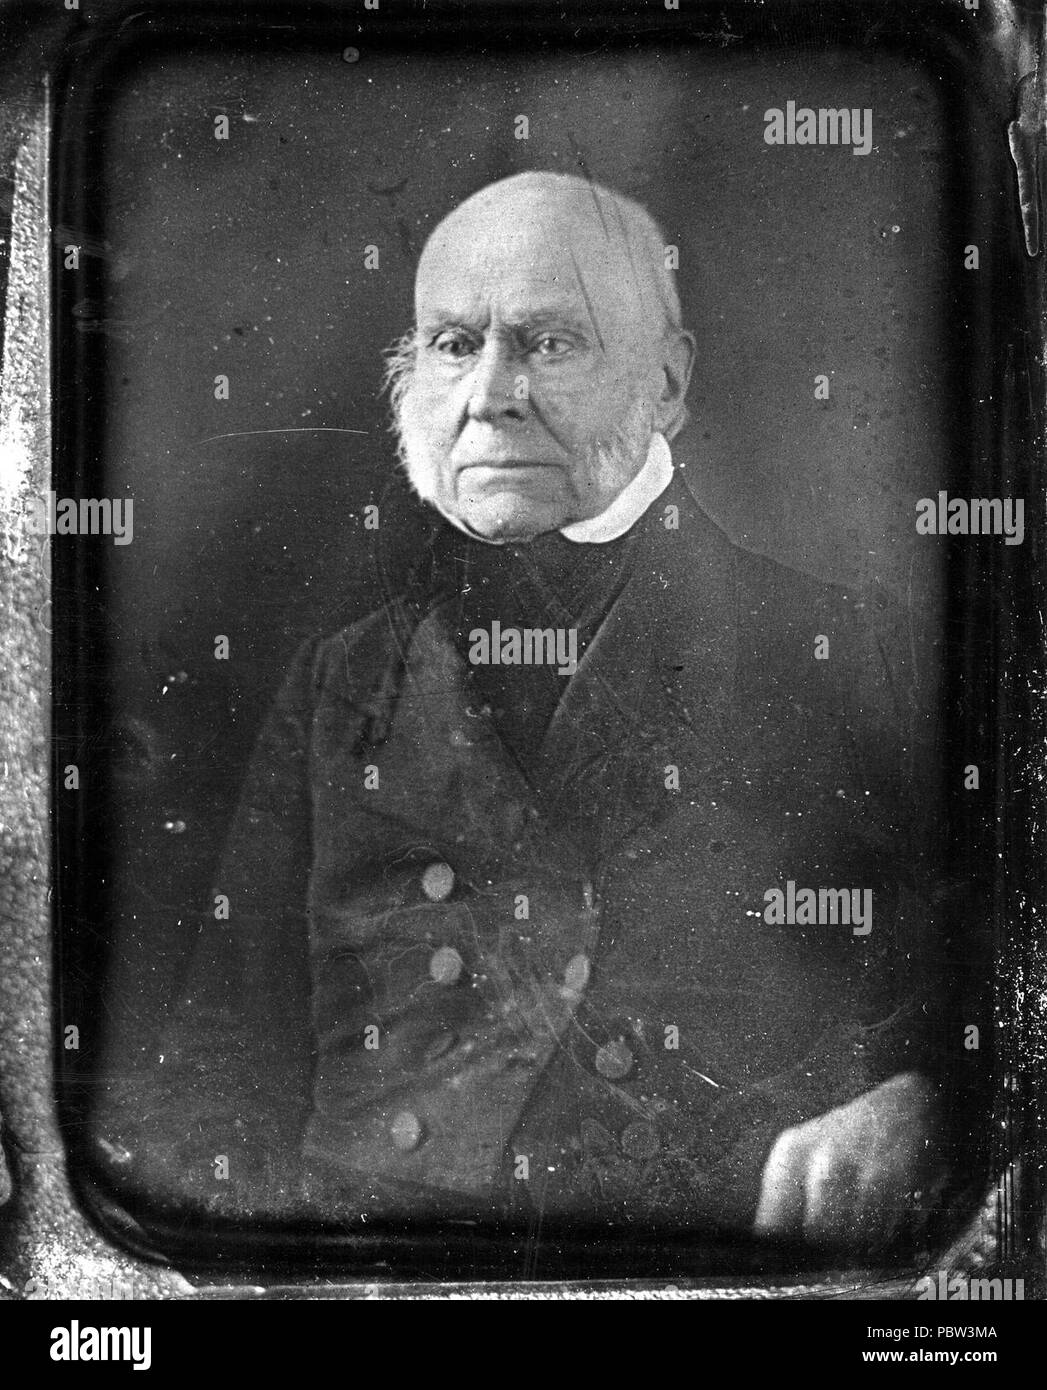 John Quincy Adams daguerreotype c1840s. 'Record Unit 95, Box 1, Folder 18'; 'Portrait of John Quincy Adams. John Quincy Adams (1767-1848), President of the United States and Member of the House of Representatives, strongly supported acceptance of Smithson bequest and urged creation of an astronomical observatory.' Stock Photo